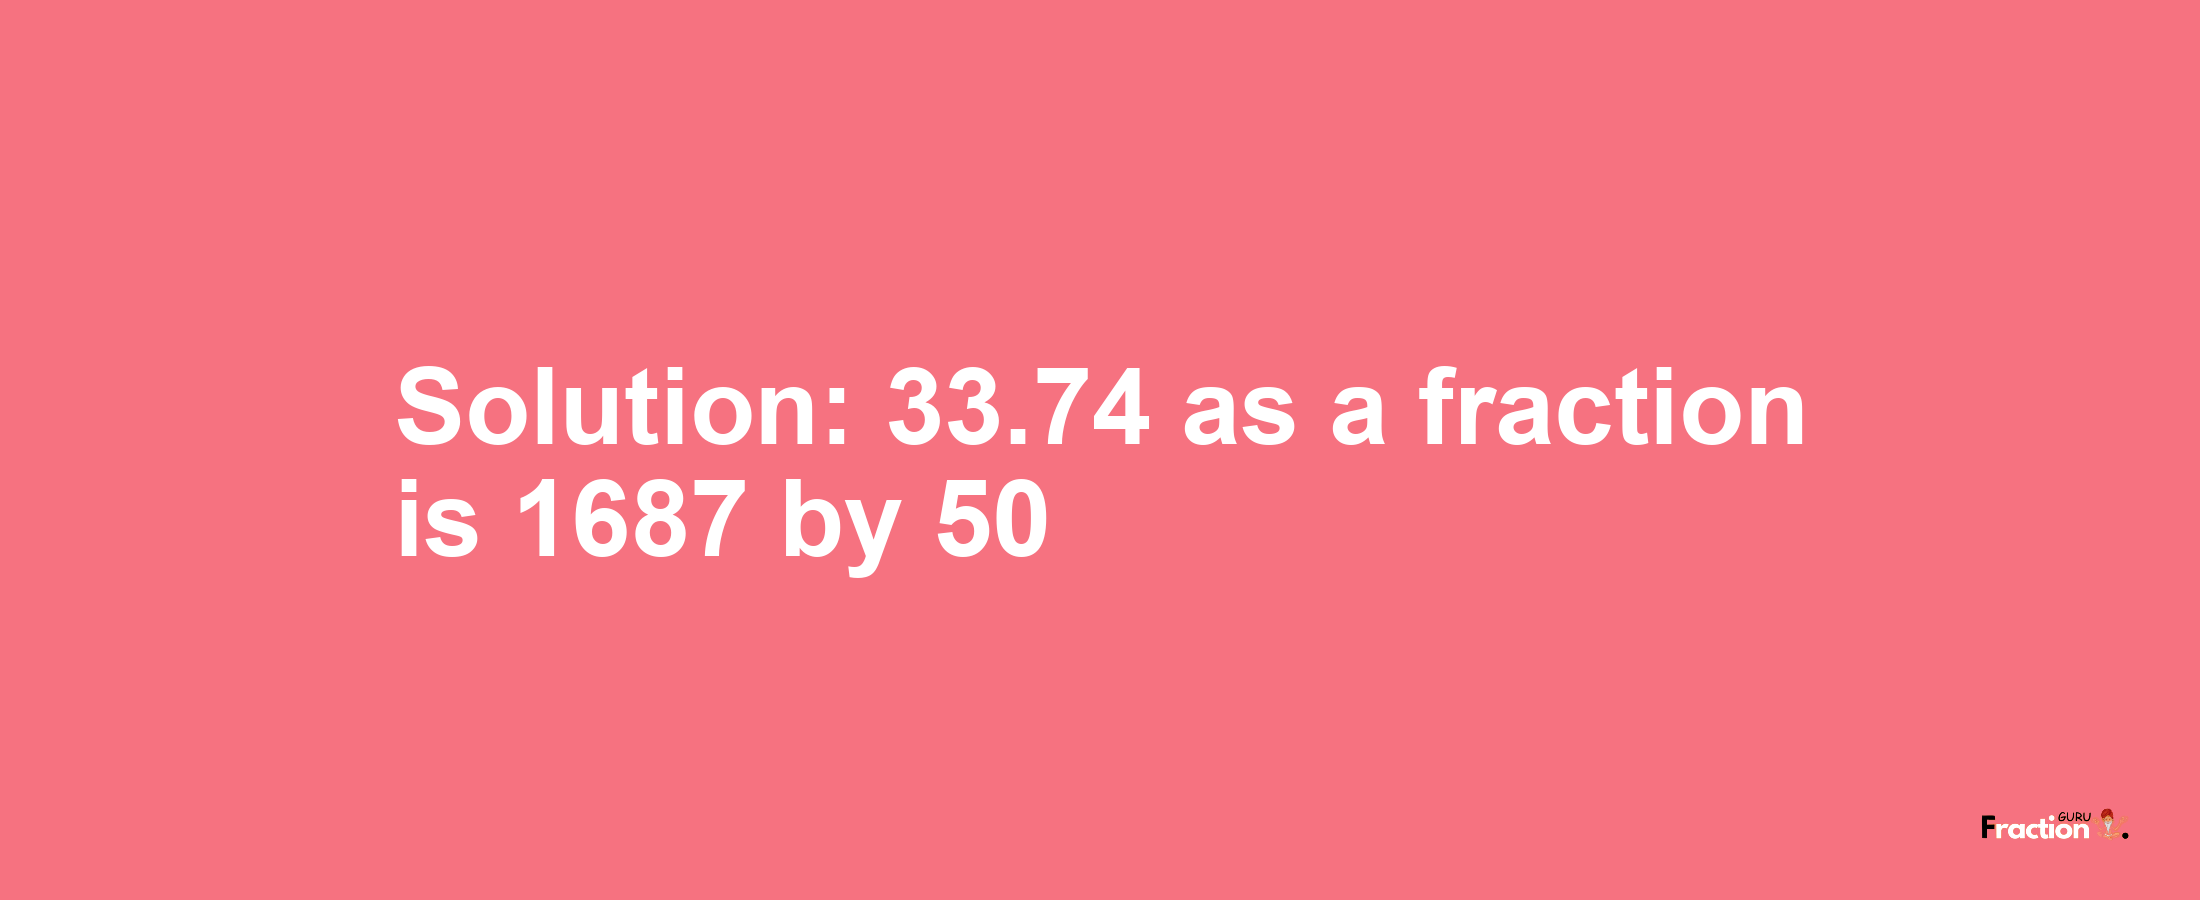 Solution:33.74 as a fraction is 1687/50